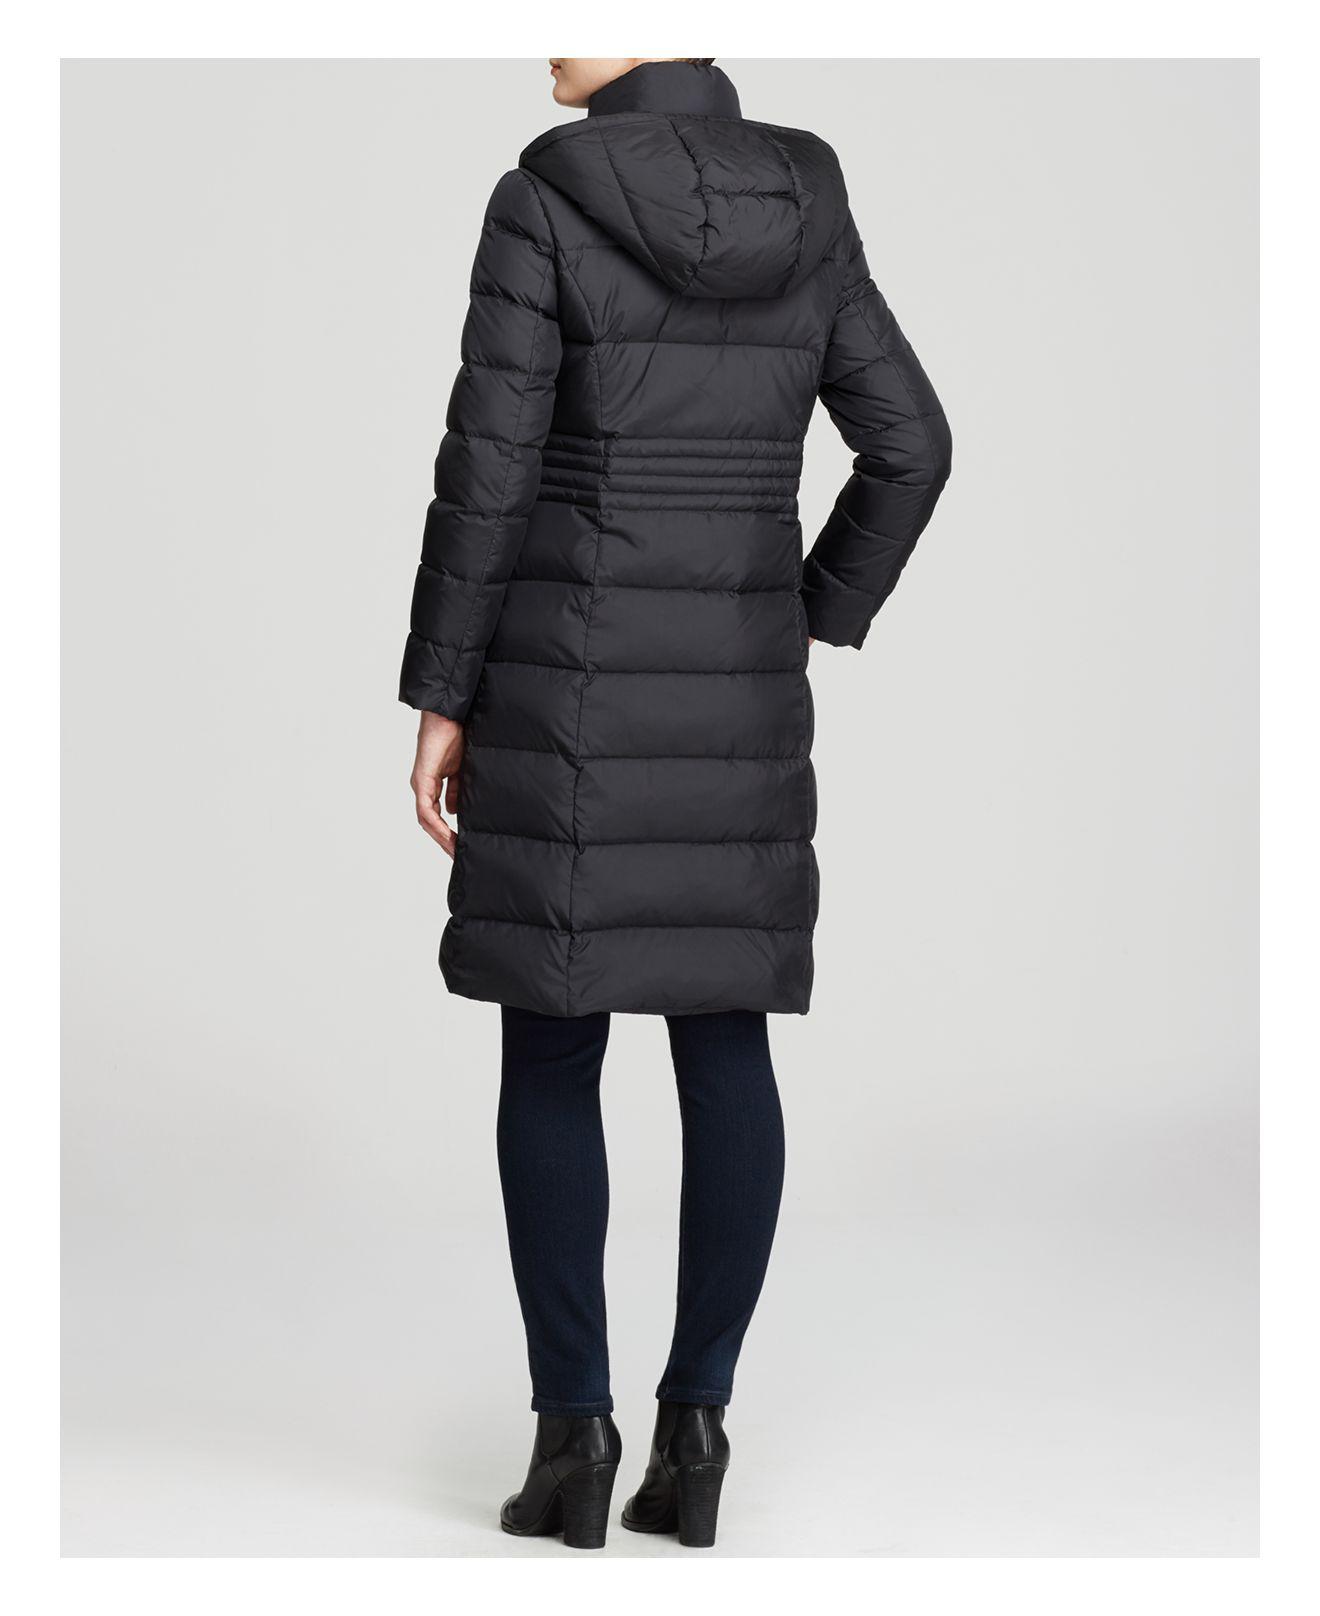 Lyst - Cole Haan Quilted Down Coat in Black